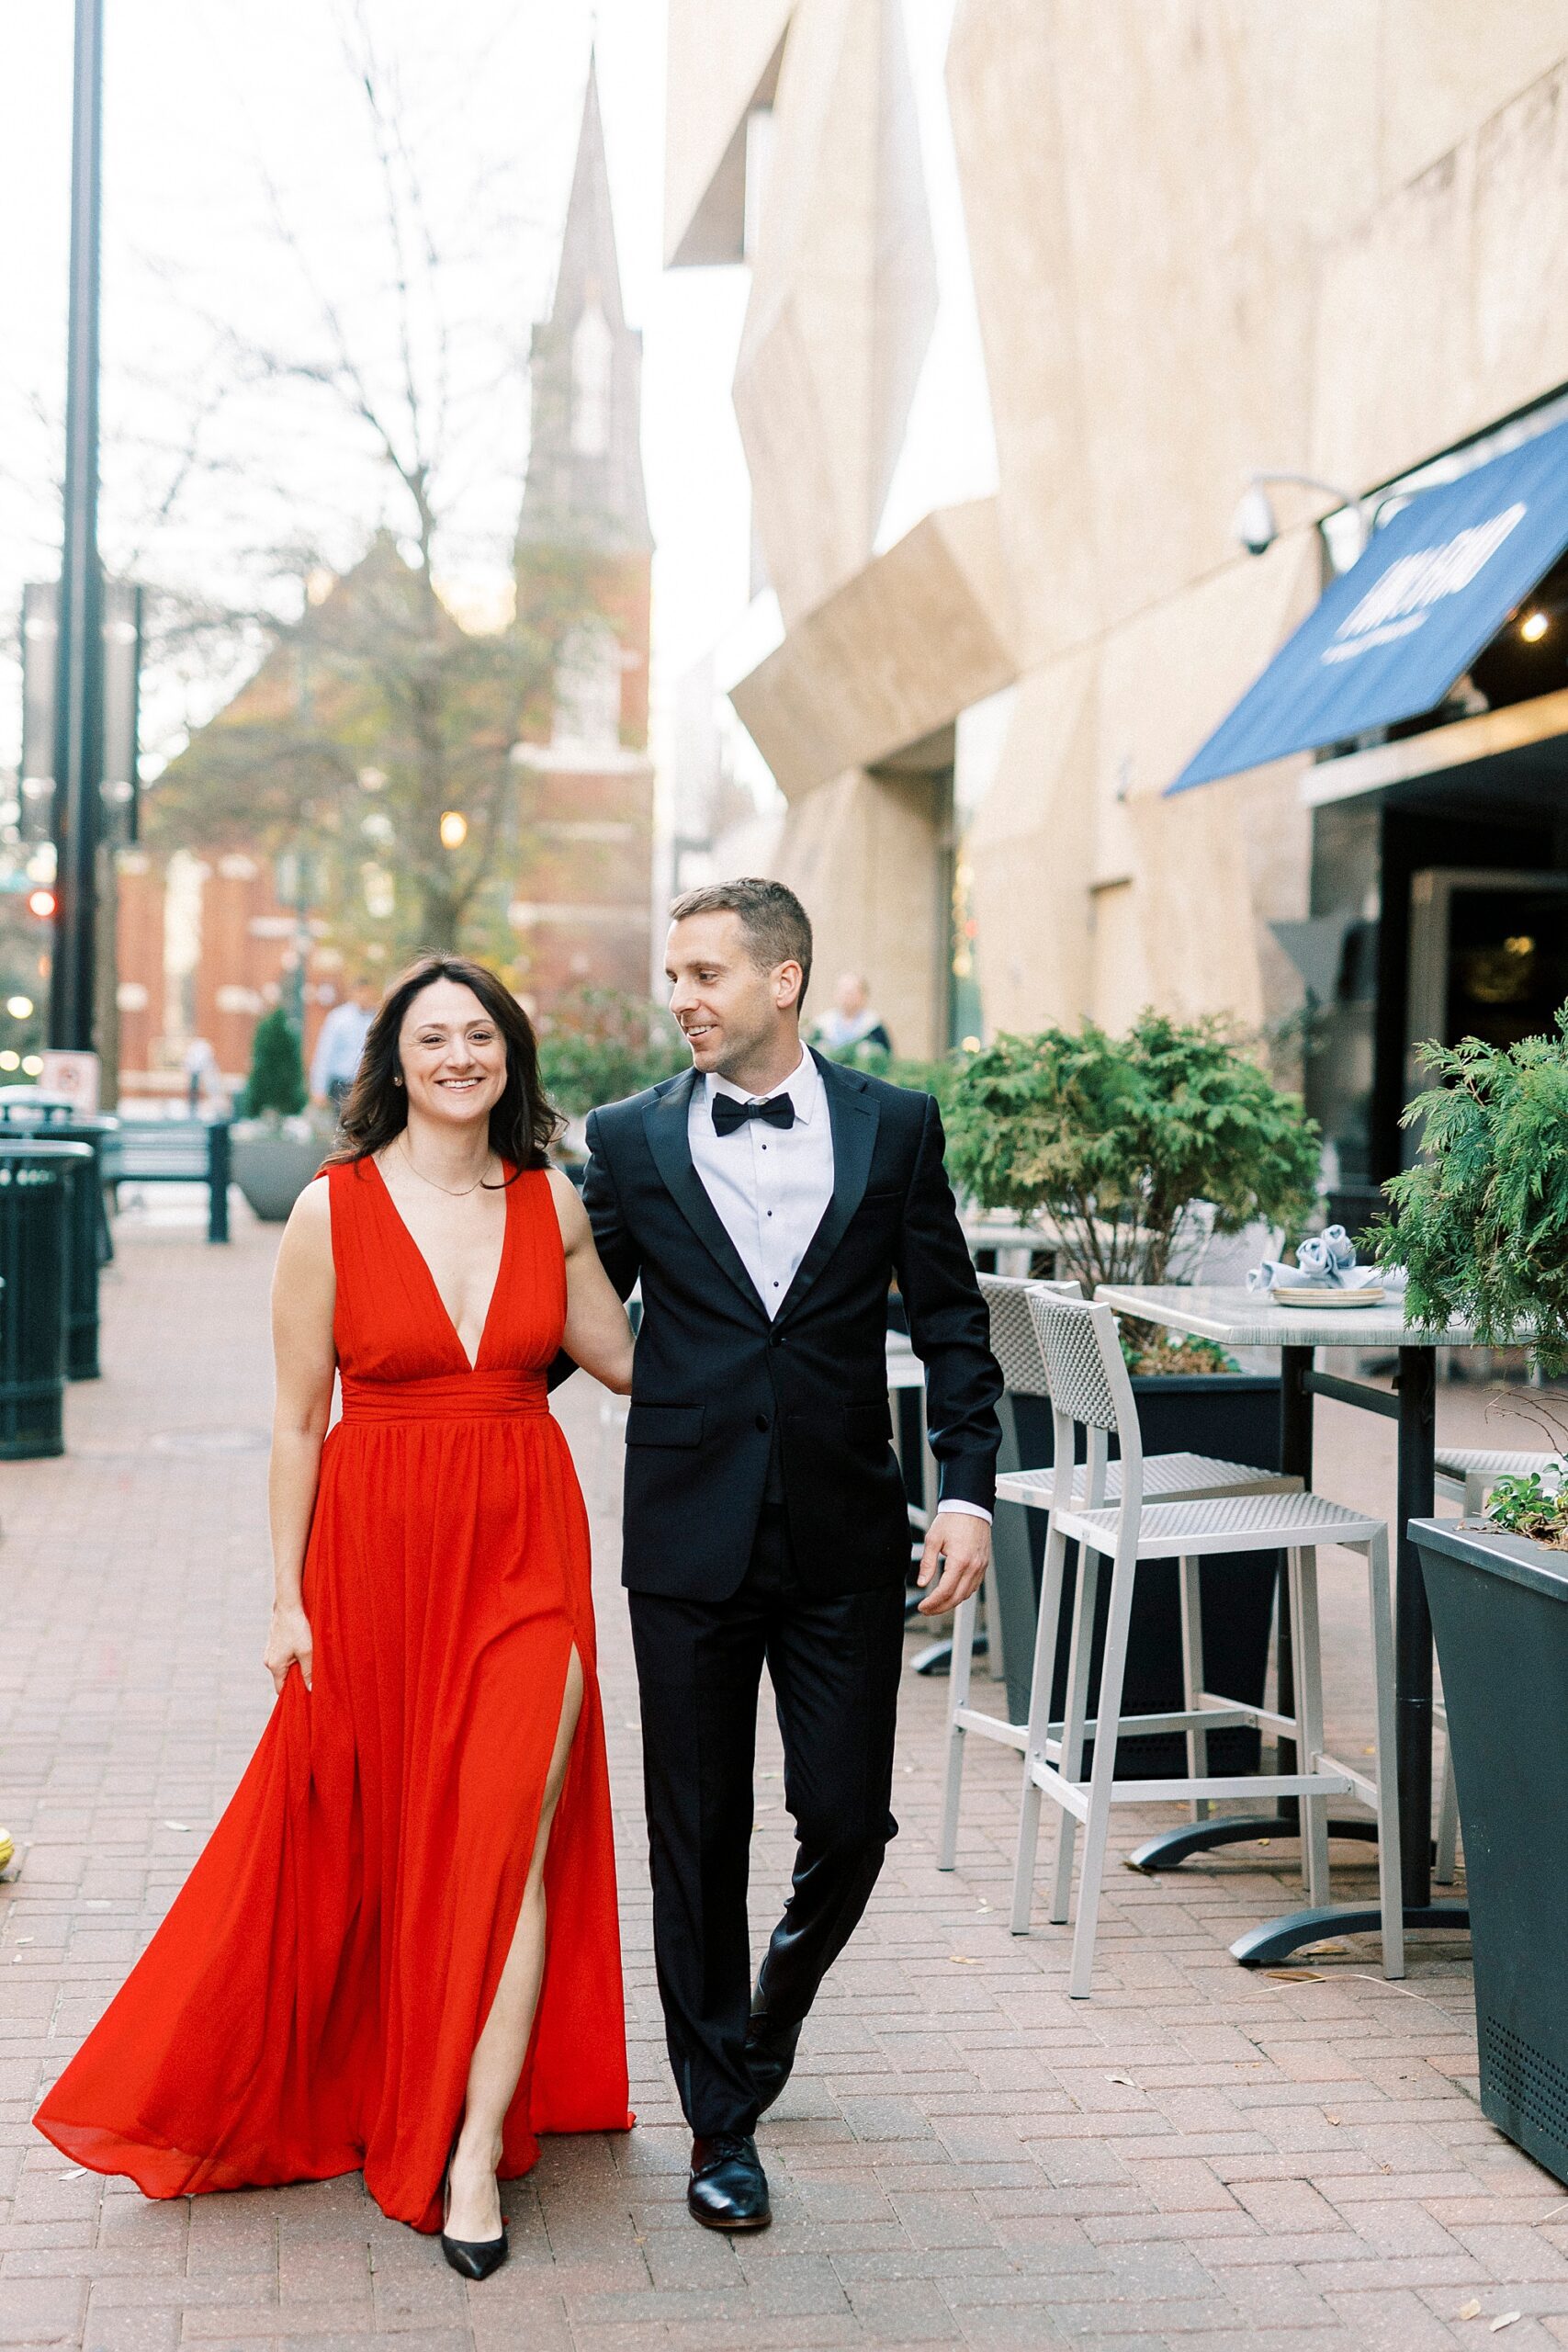 engaged couple holds hands walking down street in classy attire 